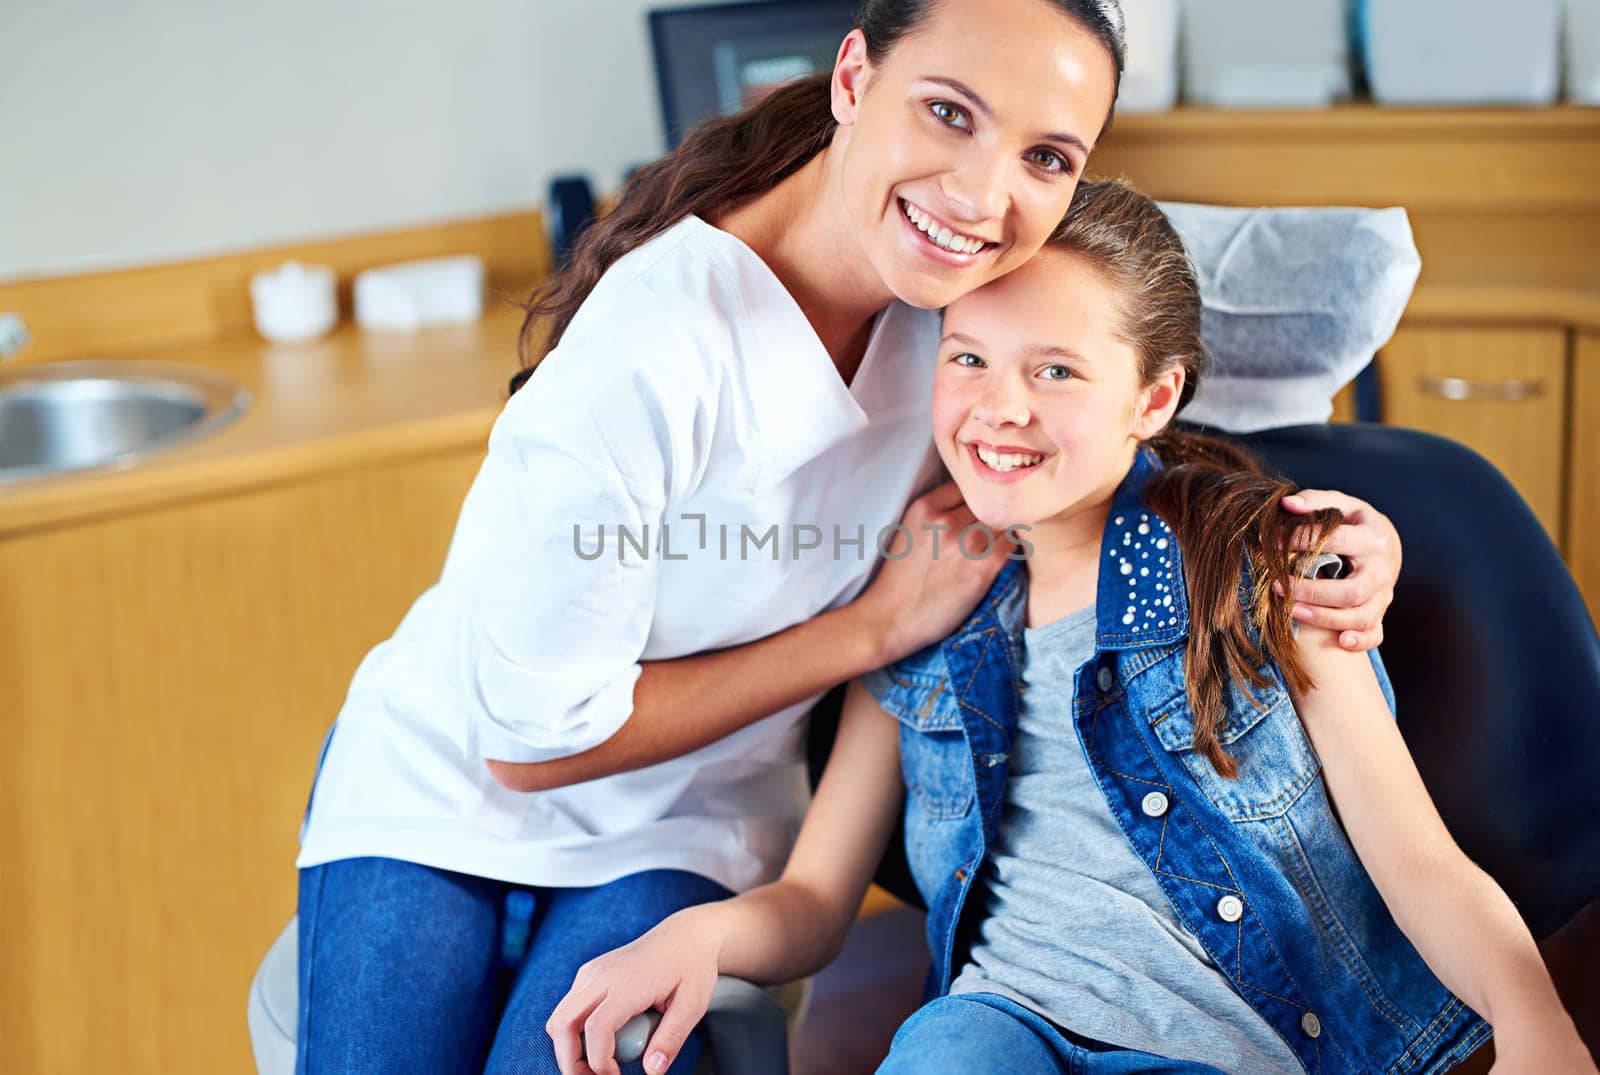 Portrait, girl and dentist with child, woman and consultation for medical procedure and oral health. Face, professional and kid with employee and dental hygiene with care and trust with appointment by YuriArcurs